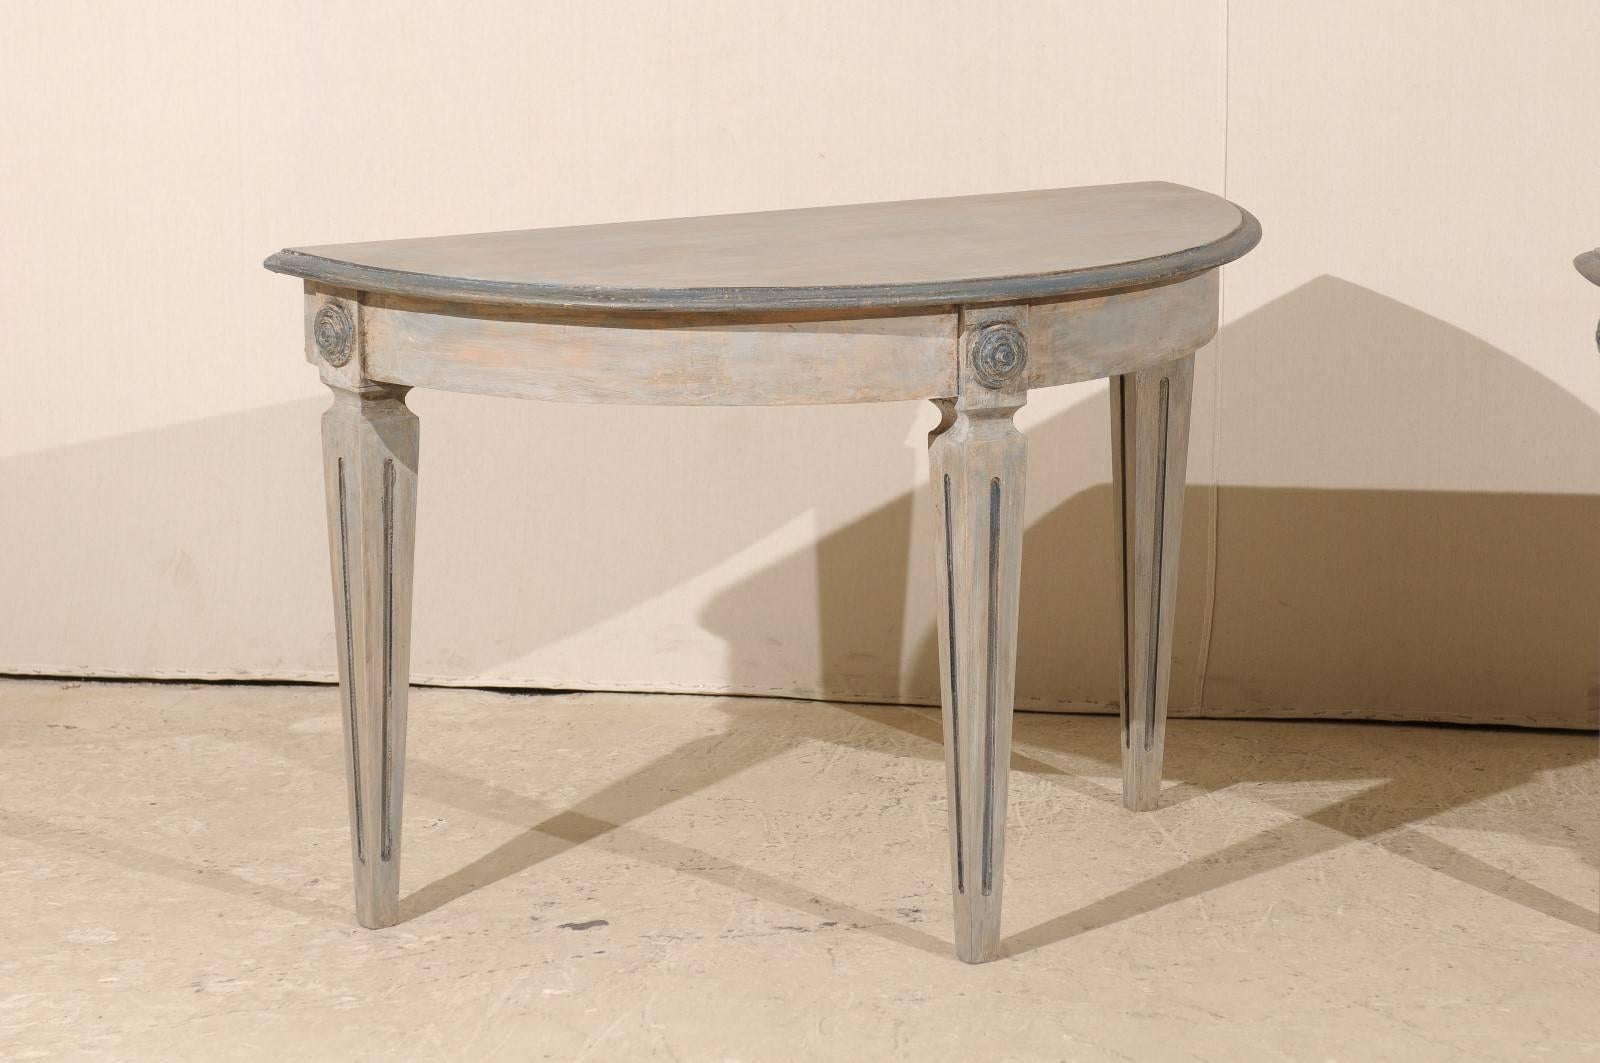 Carved Pair of Swedish Painted Wood Demilune Tables with Fluted and Tapered Legs